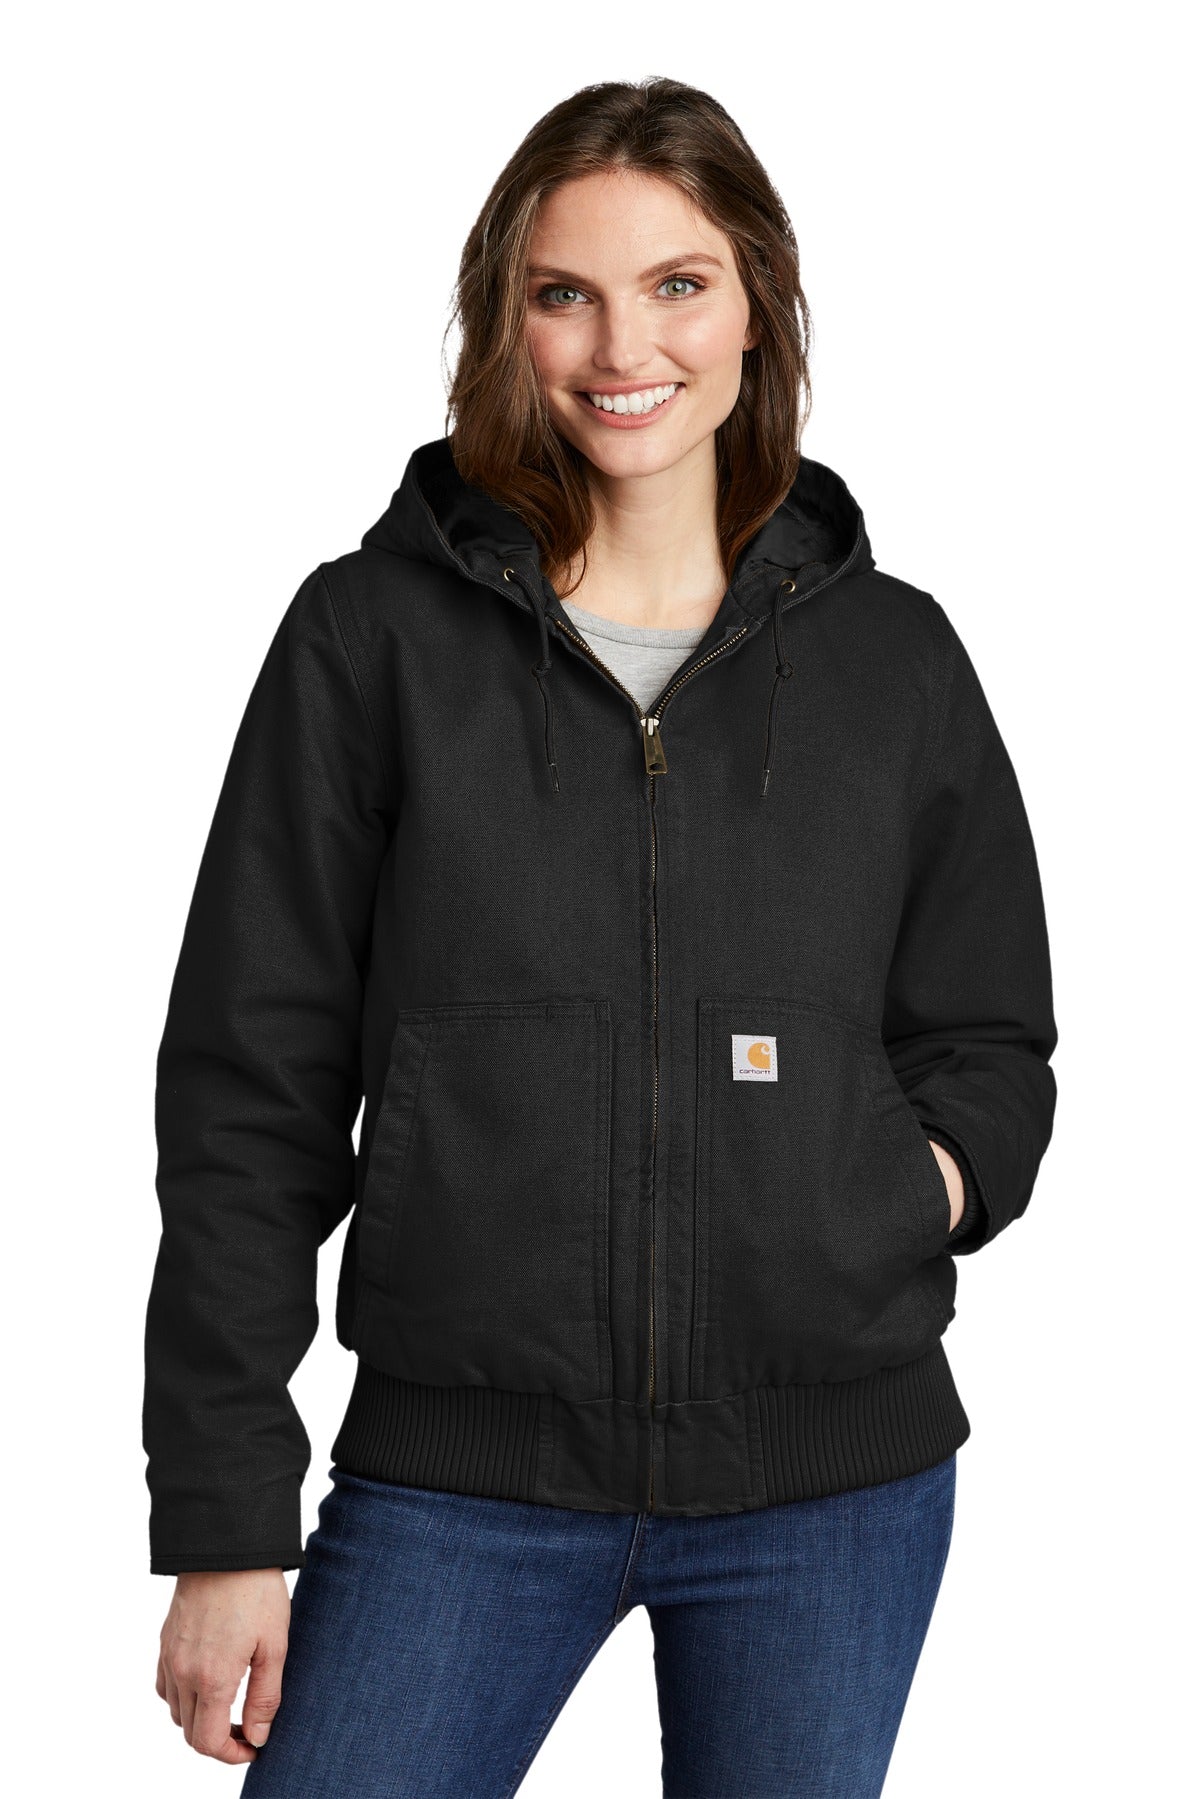 HBA Carhartt® Women's Washed Duck Active Jac. CT104053